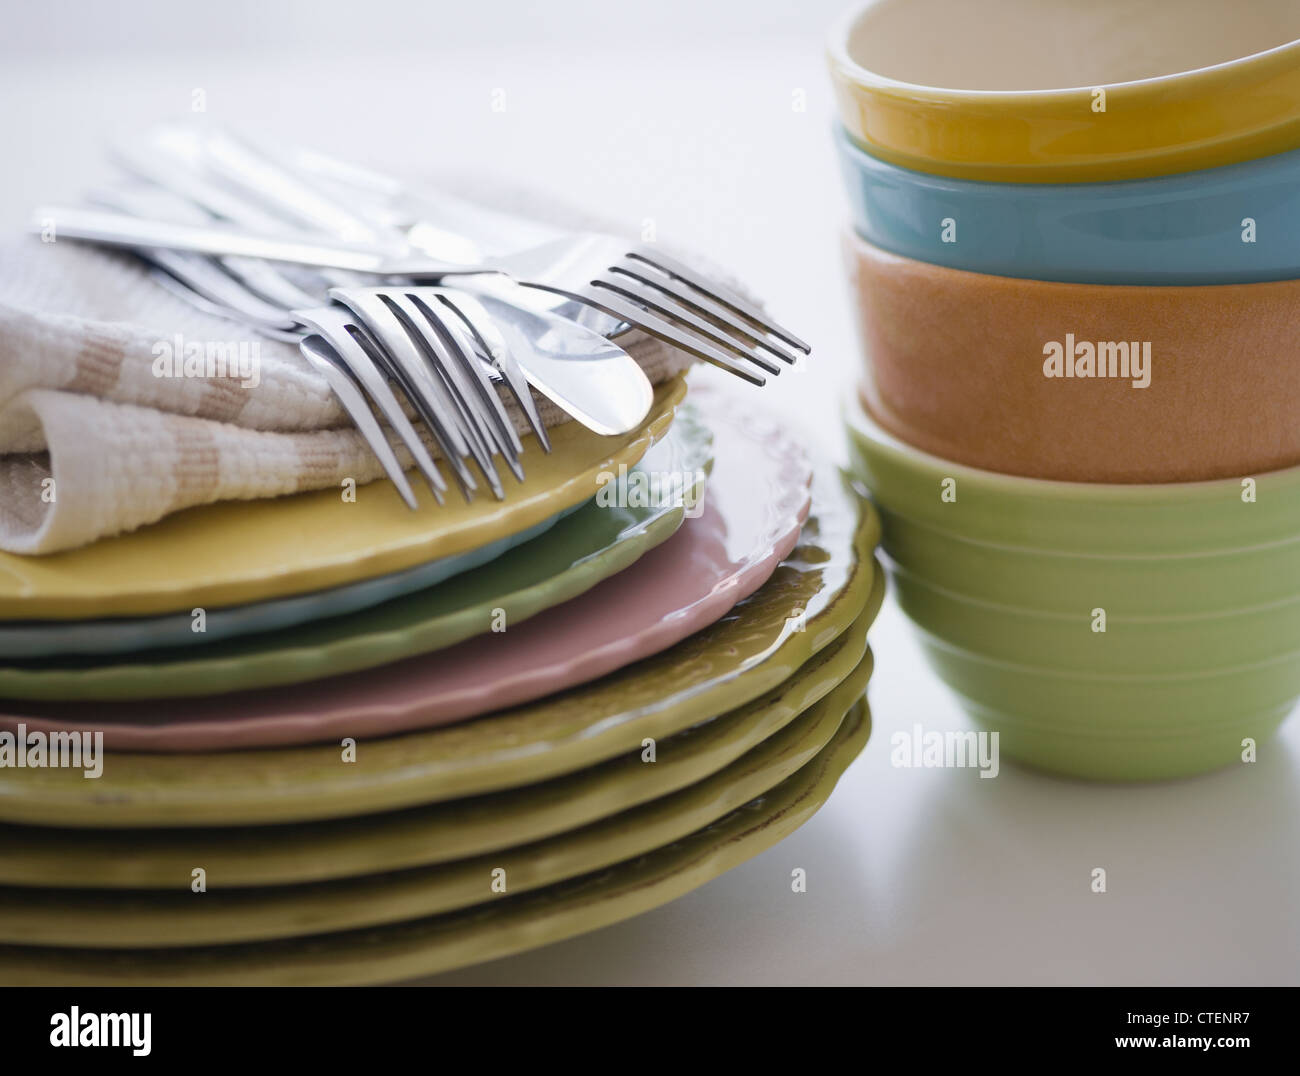 Stack of bowls and plates Stock Photo